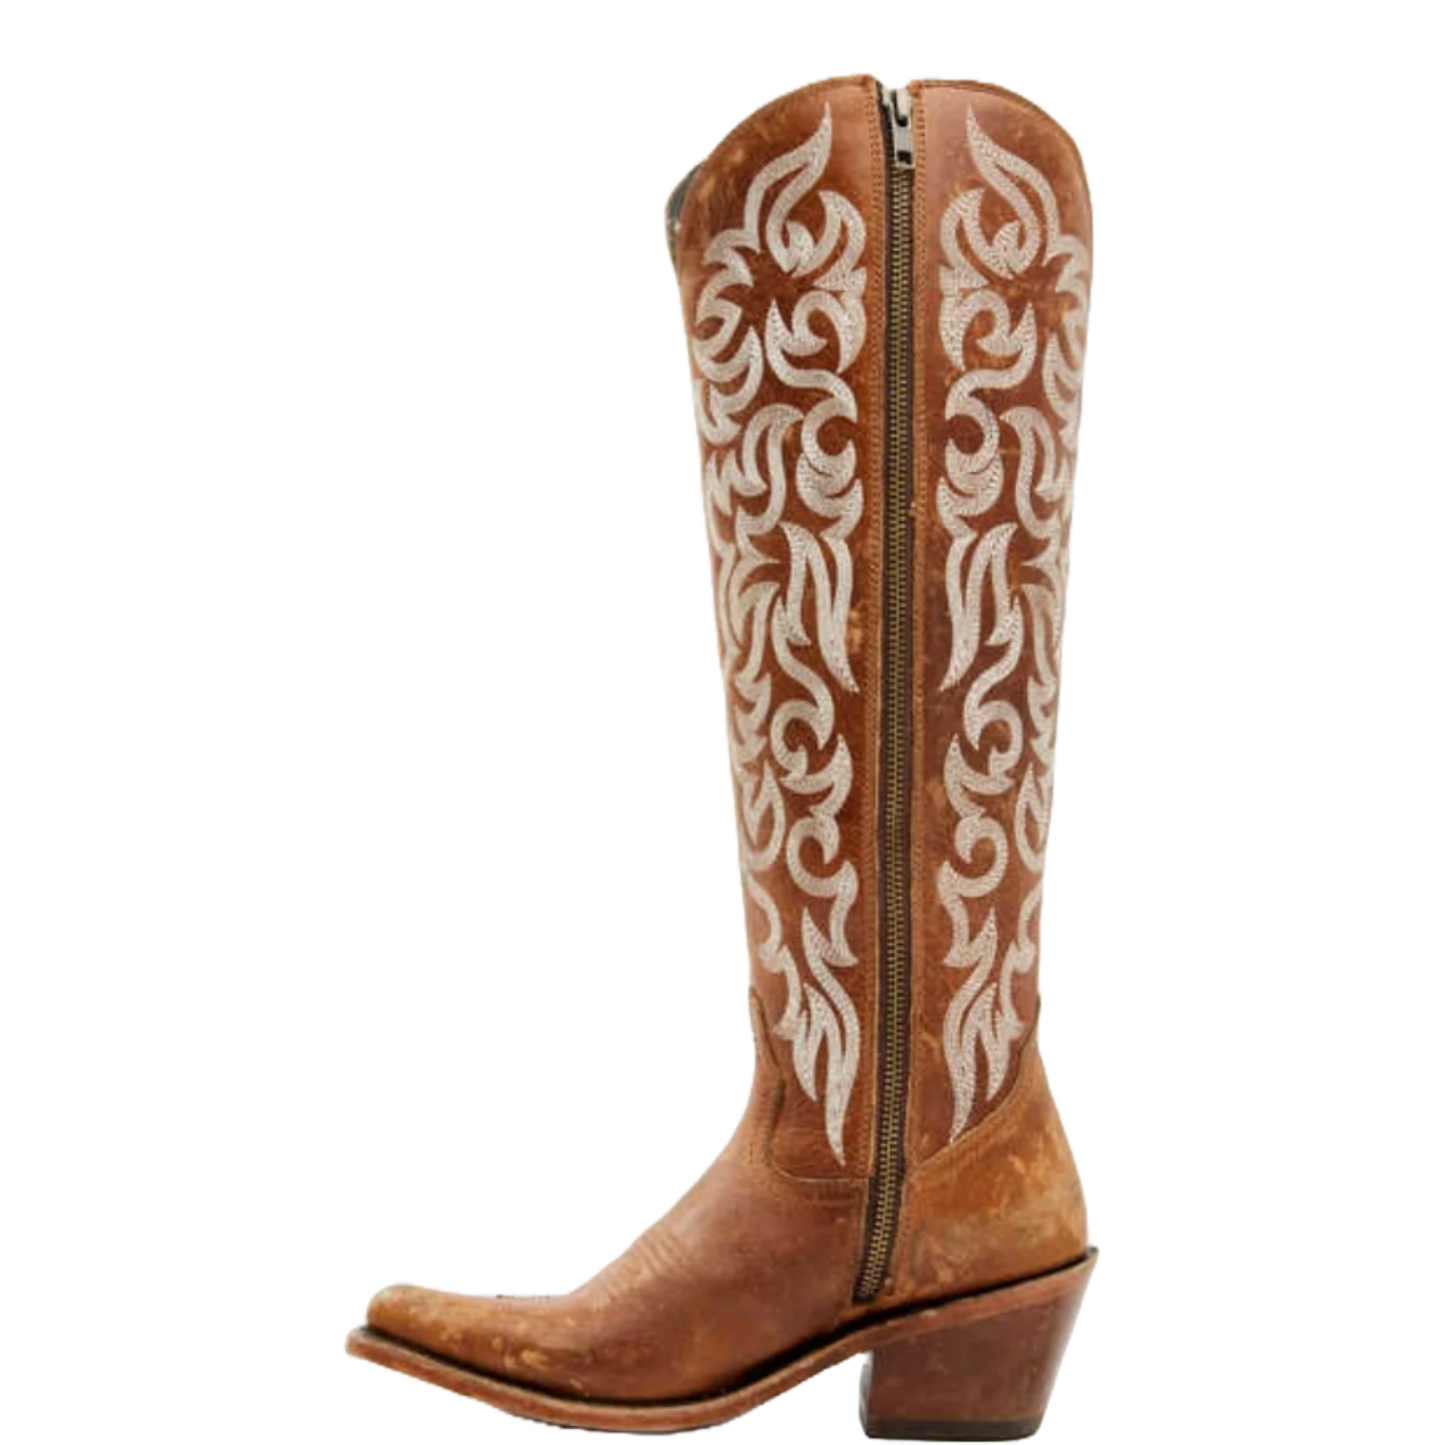 Liberty Black Ladies Embroidered Allie Mossil Tan Western Boots LB-712988G